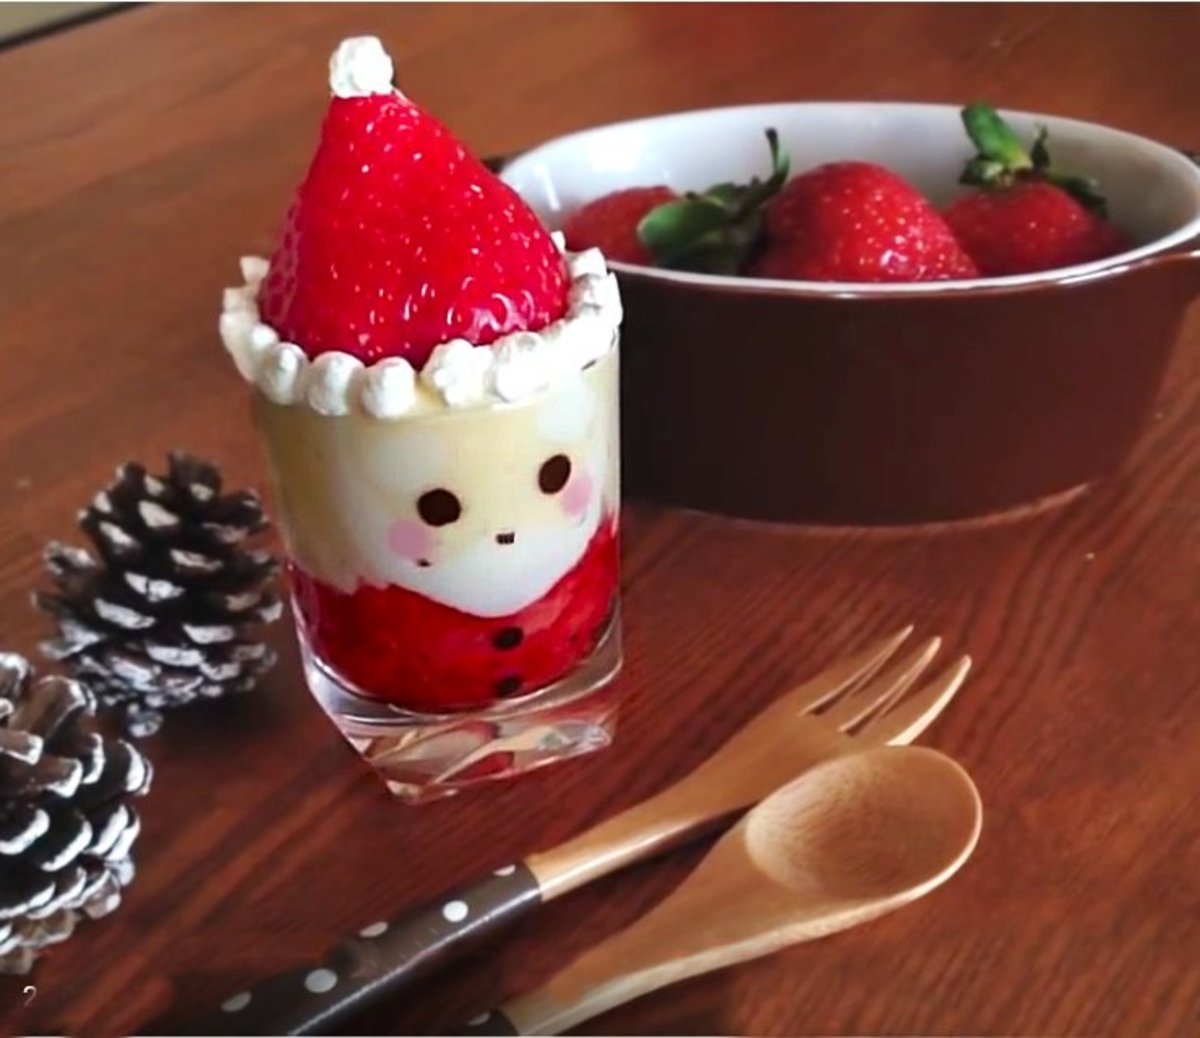 Easy and impressive Christmas dessert in a shot glass